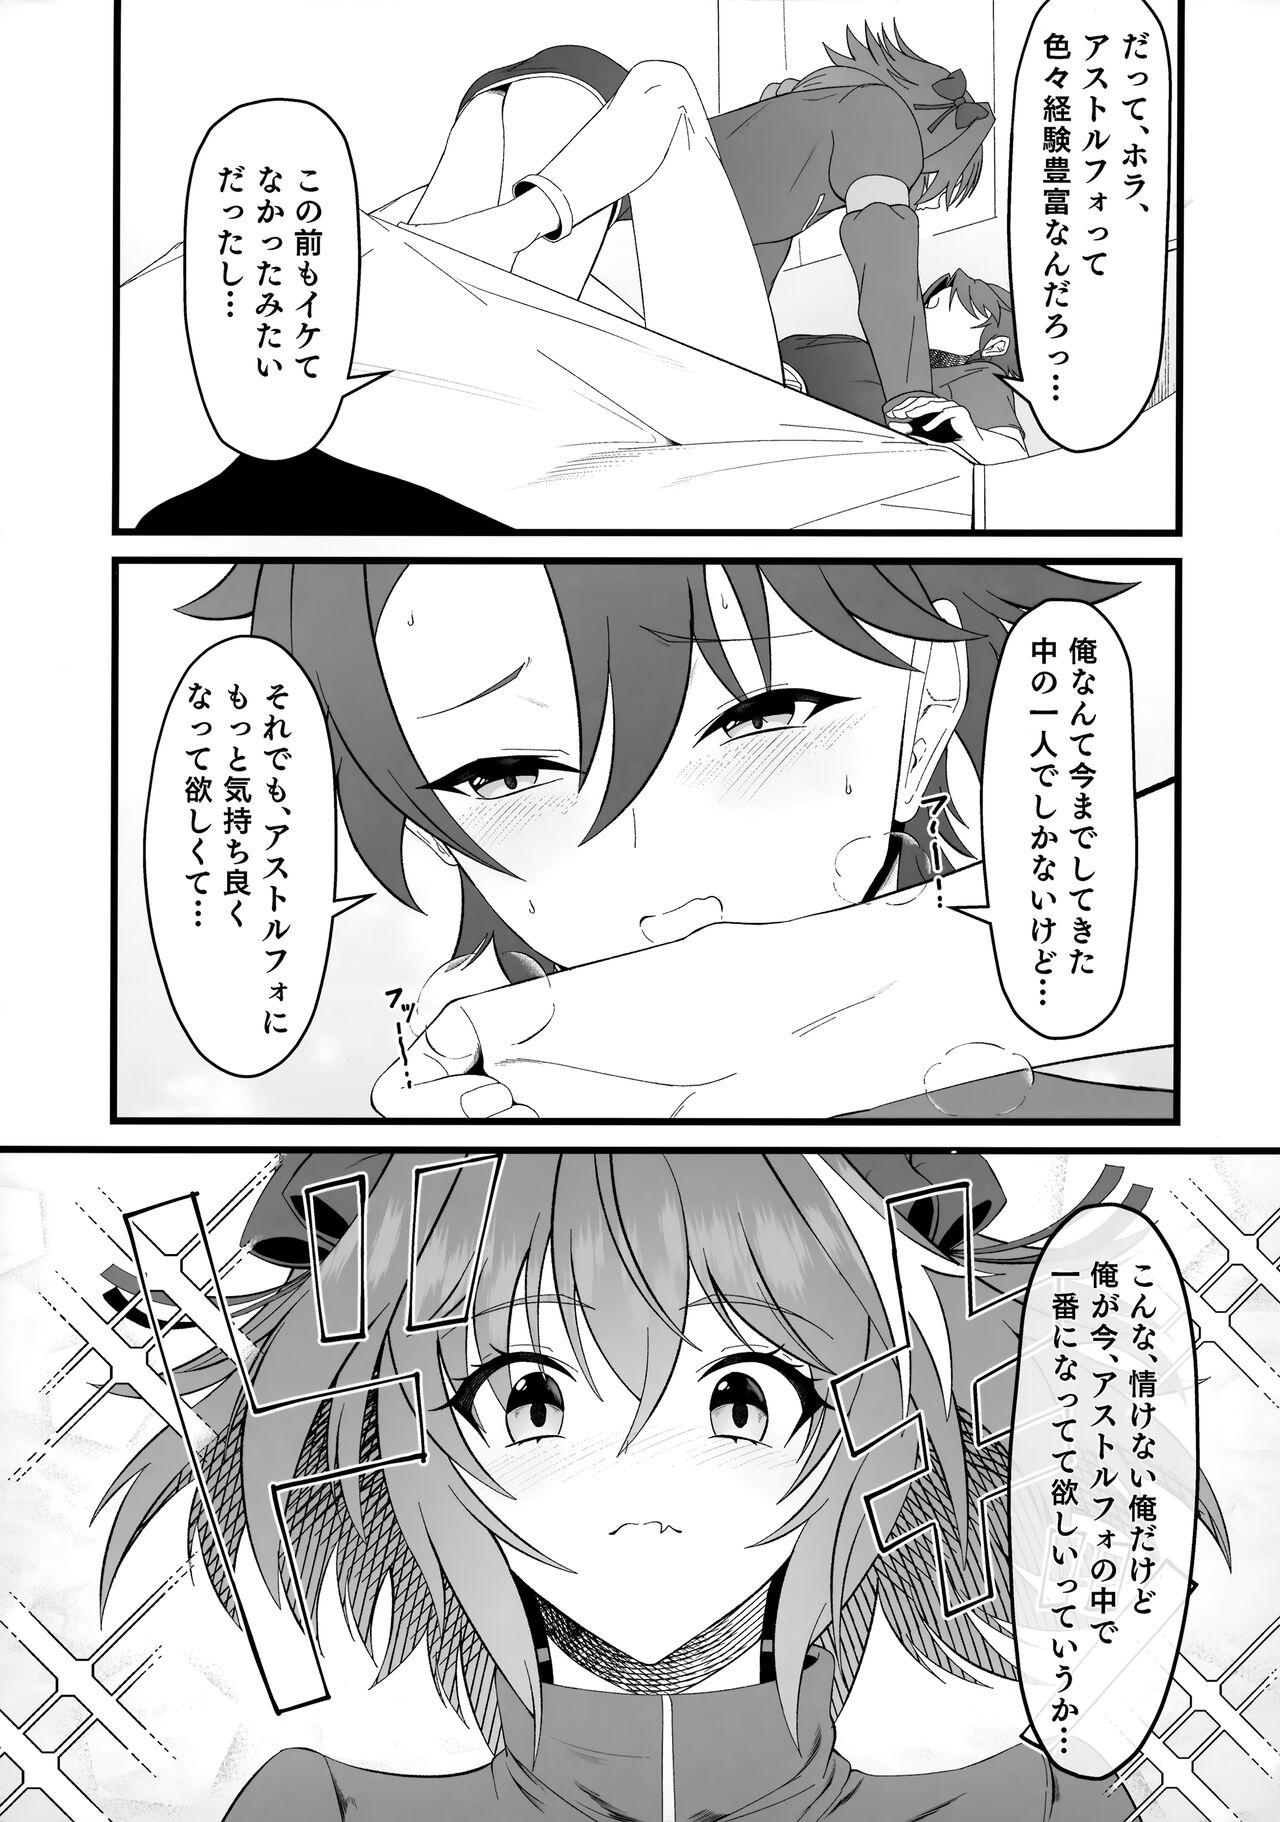 Animated Kimi no Ichiban ni Naritakute - I wanted to be your number one. - Fate grand order Clothed - Page 8